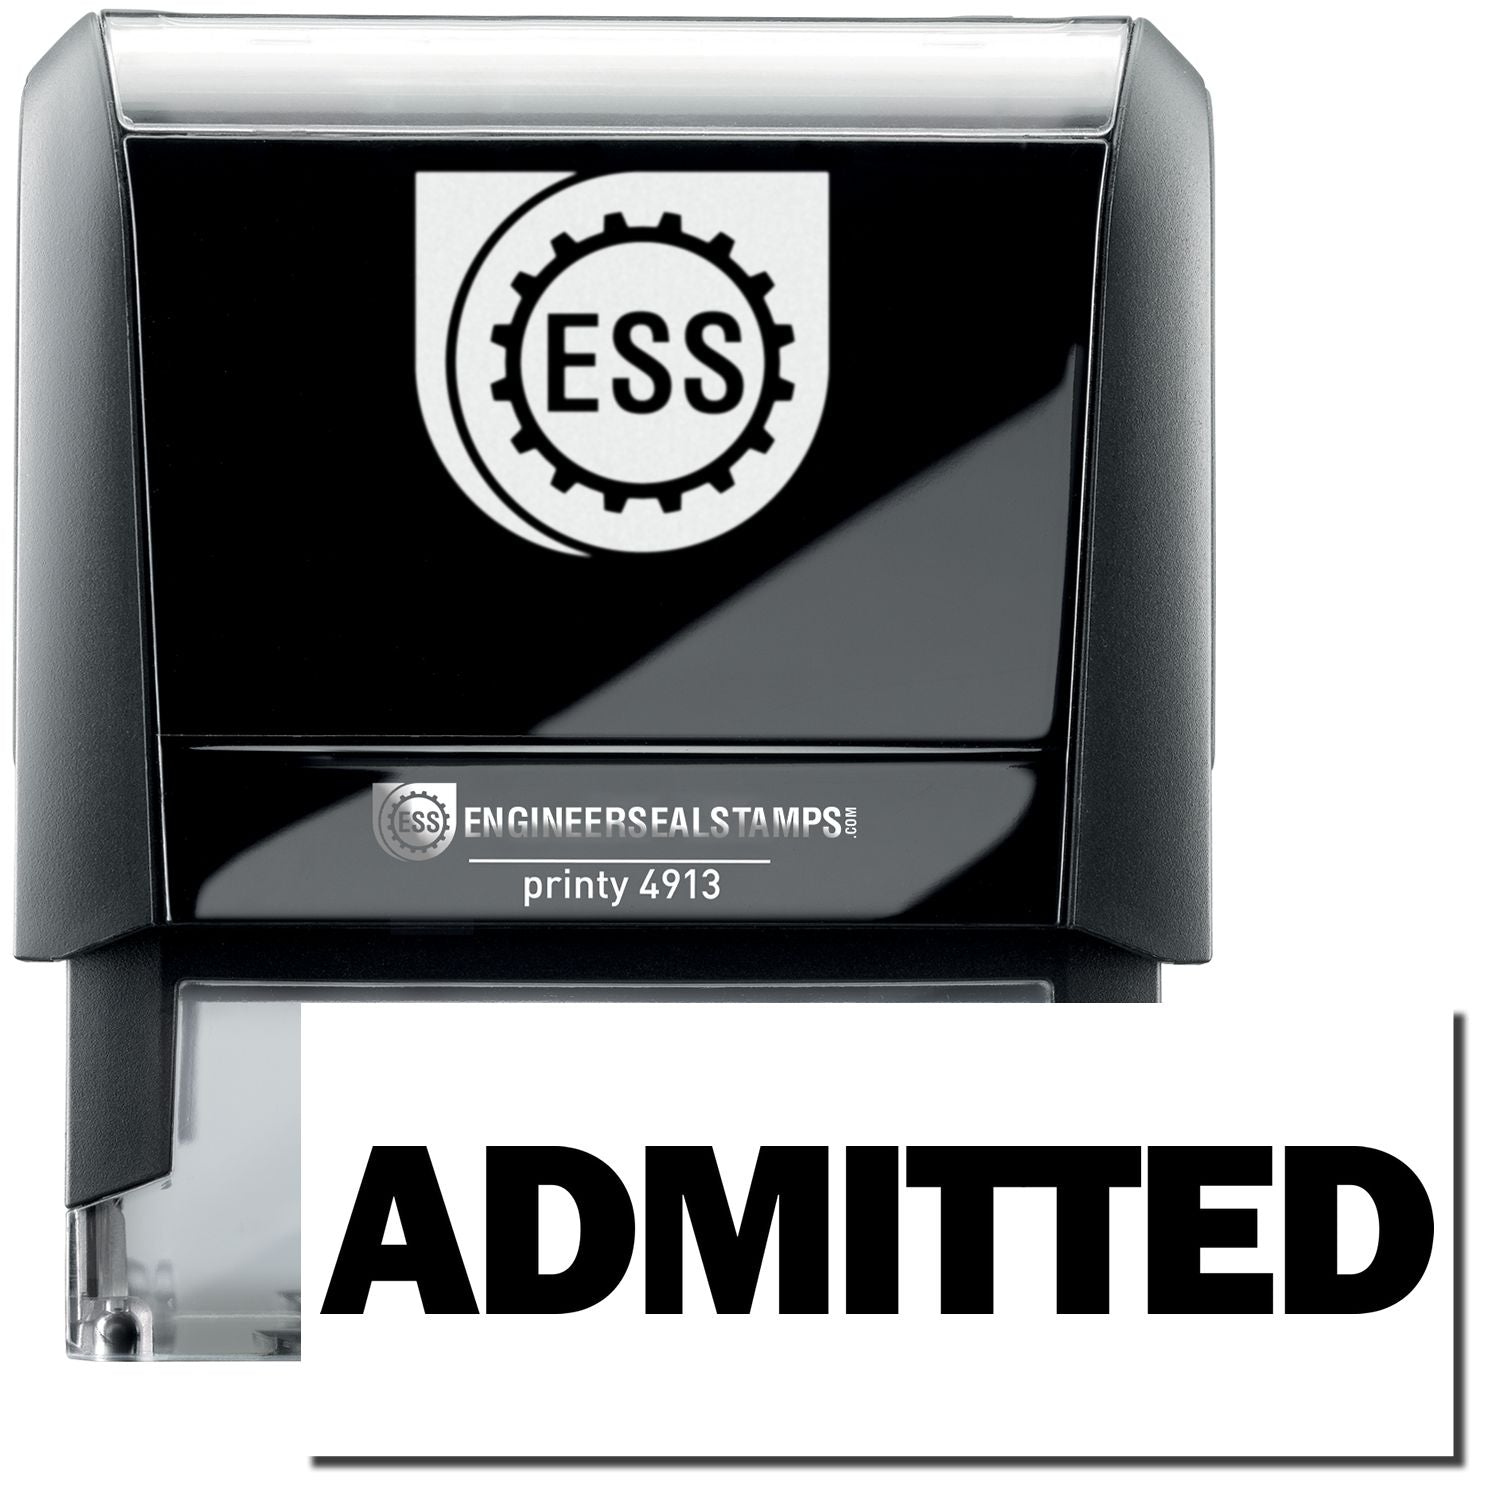 A self-inking stamp with a stamped image showing how the text "ADMITTED" in a large bold font is displayed by it after stamping.